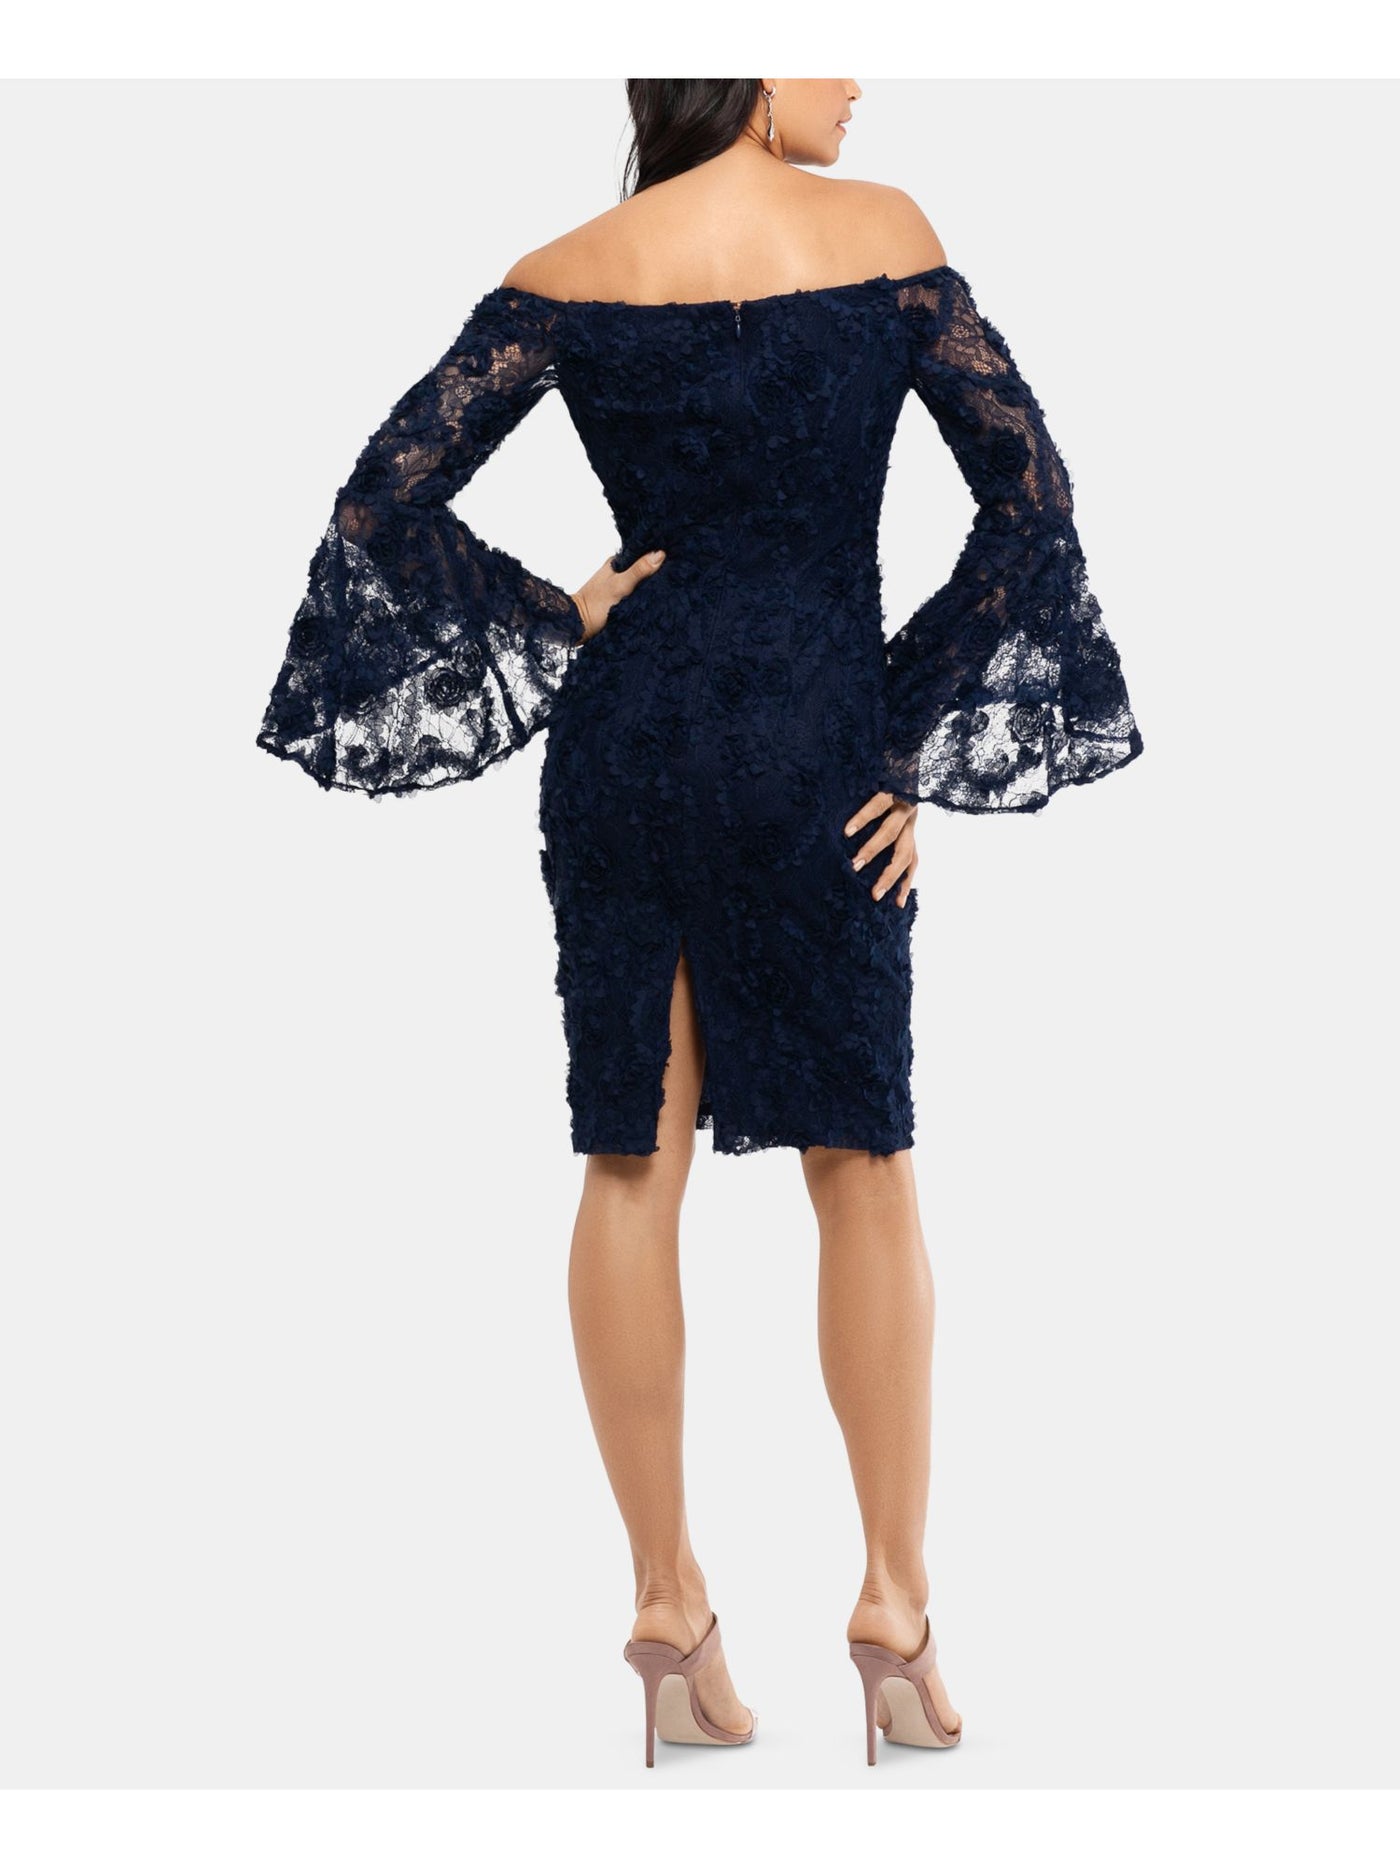 XSCAPE Womens Navy Lace Long Sleeve Off Shoulder Above The Knee Wear To Work Body Con Dress 2